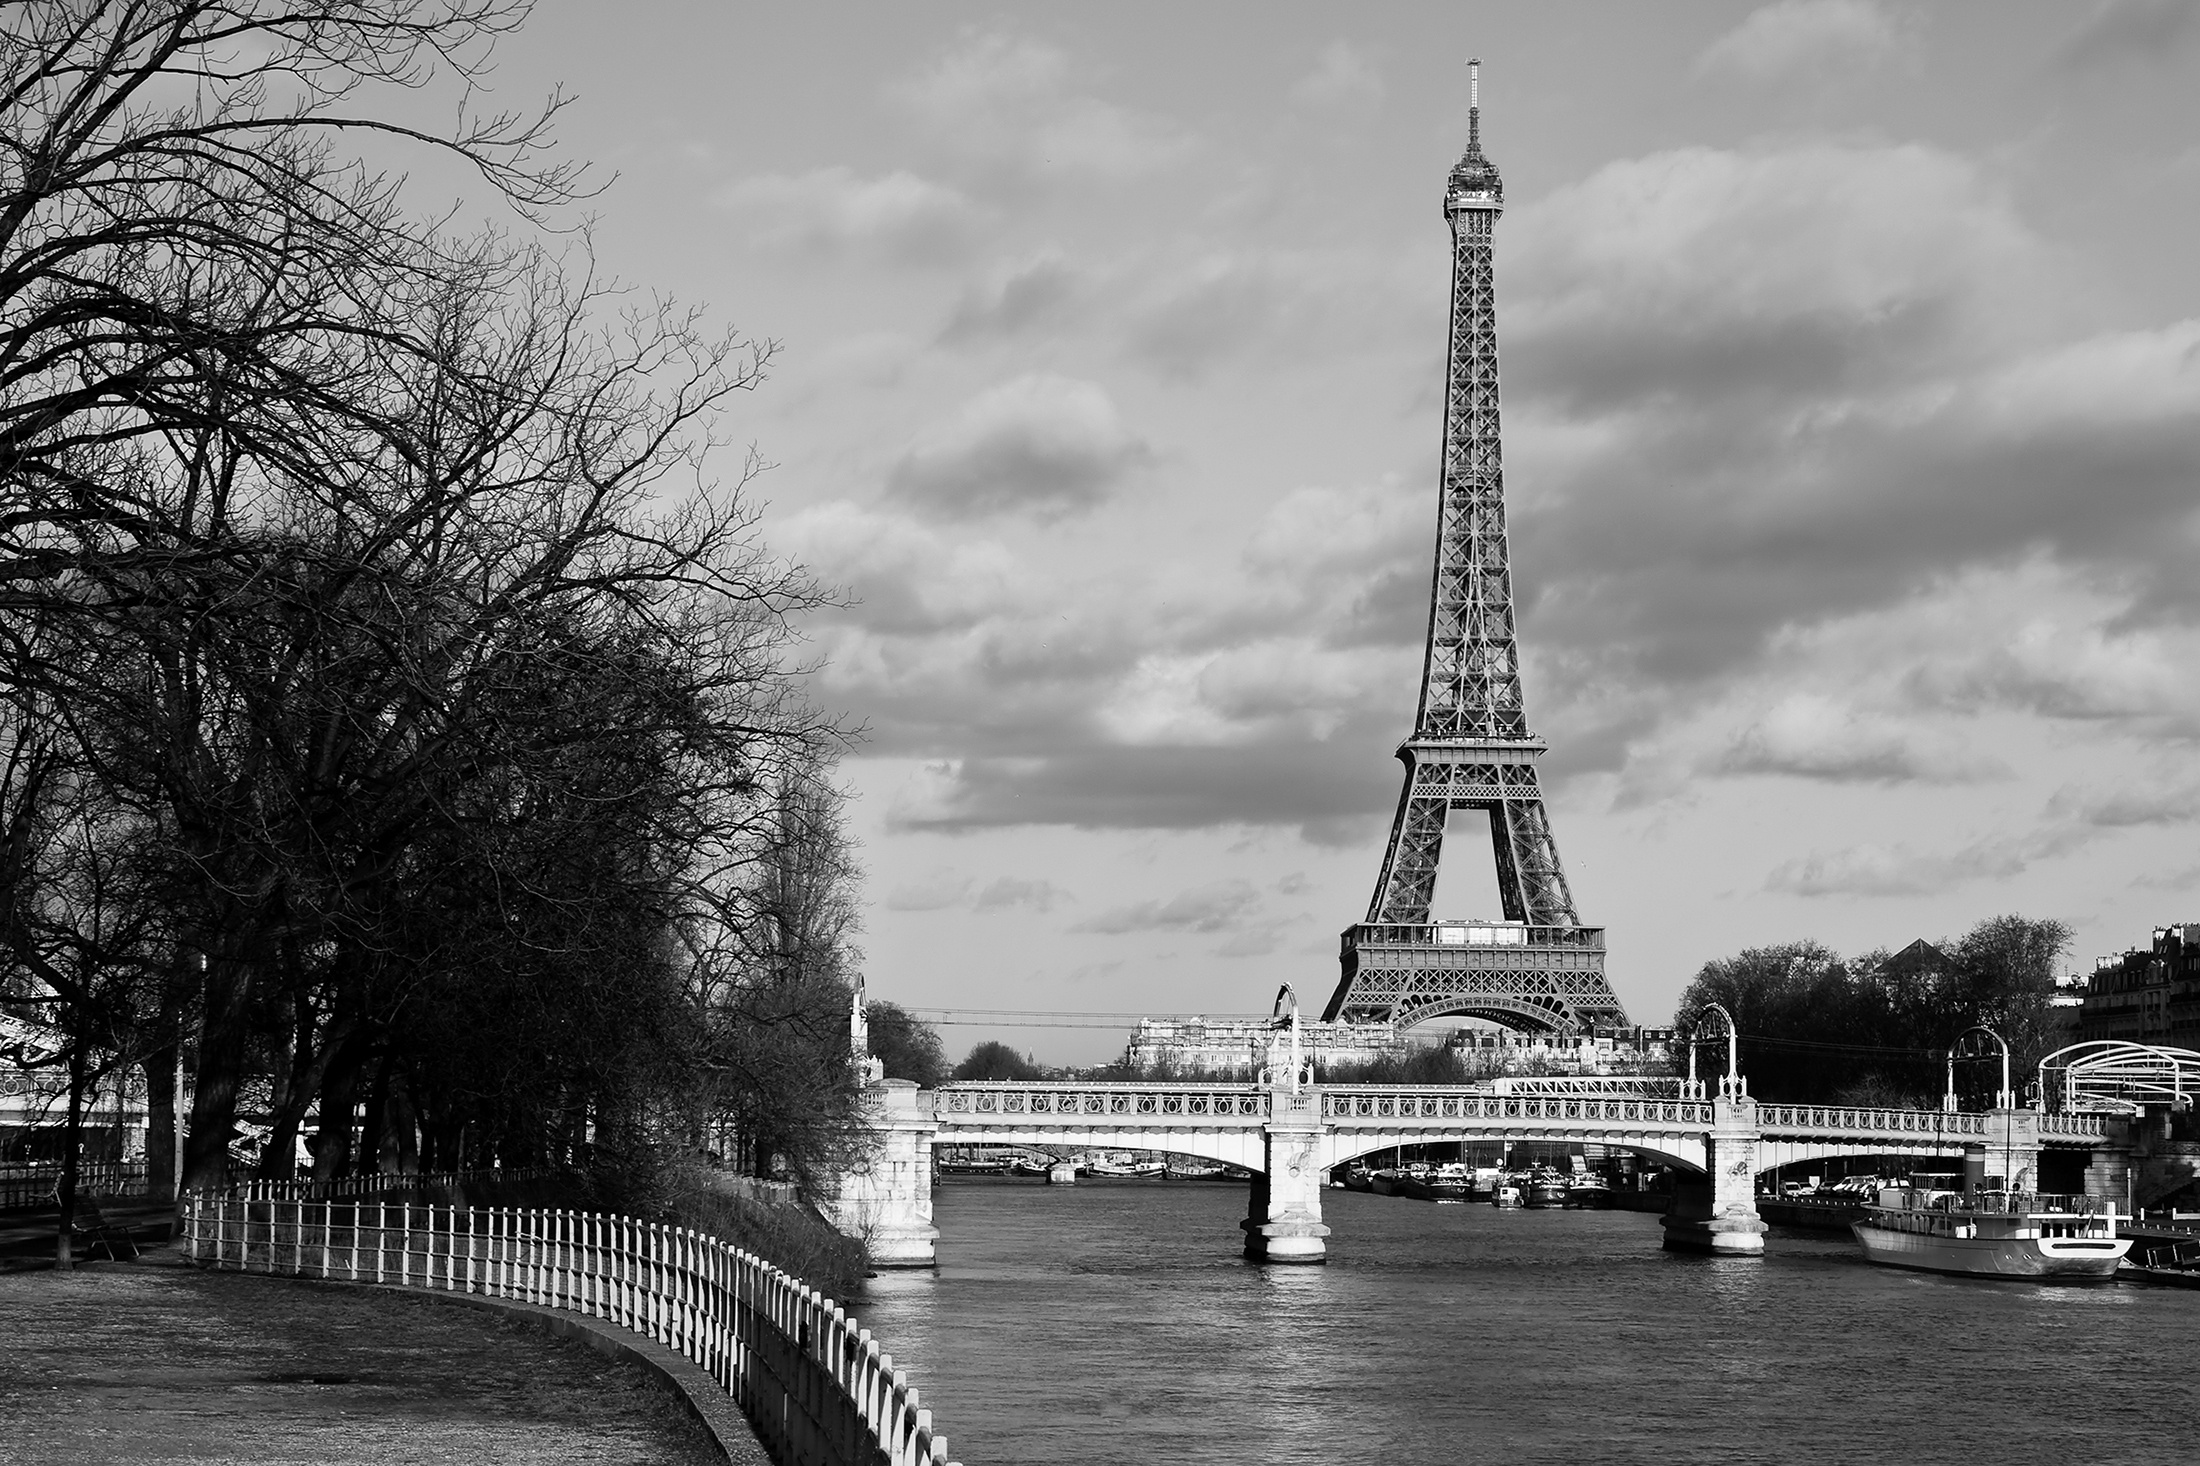 Monochrome view of the iconic Eiffel Tower rising above an elegant bridge in Paris, France.